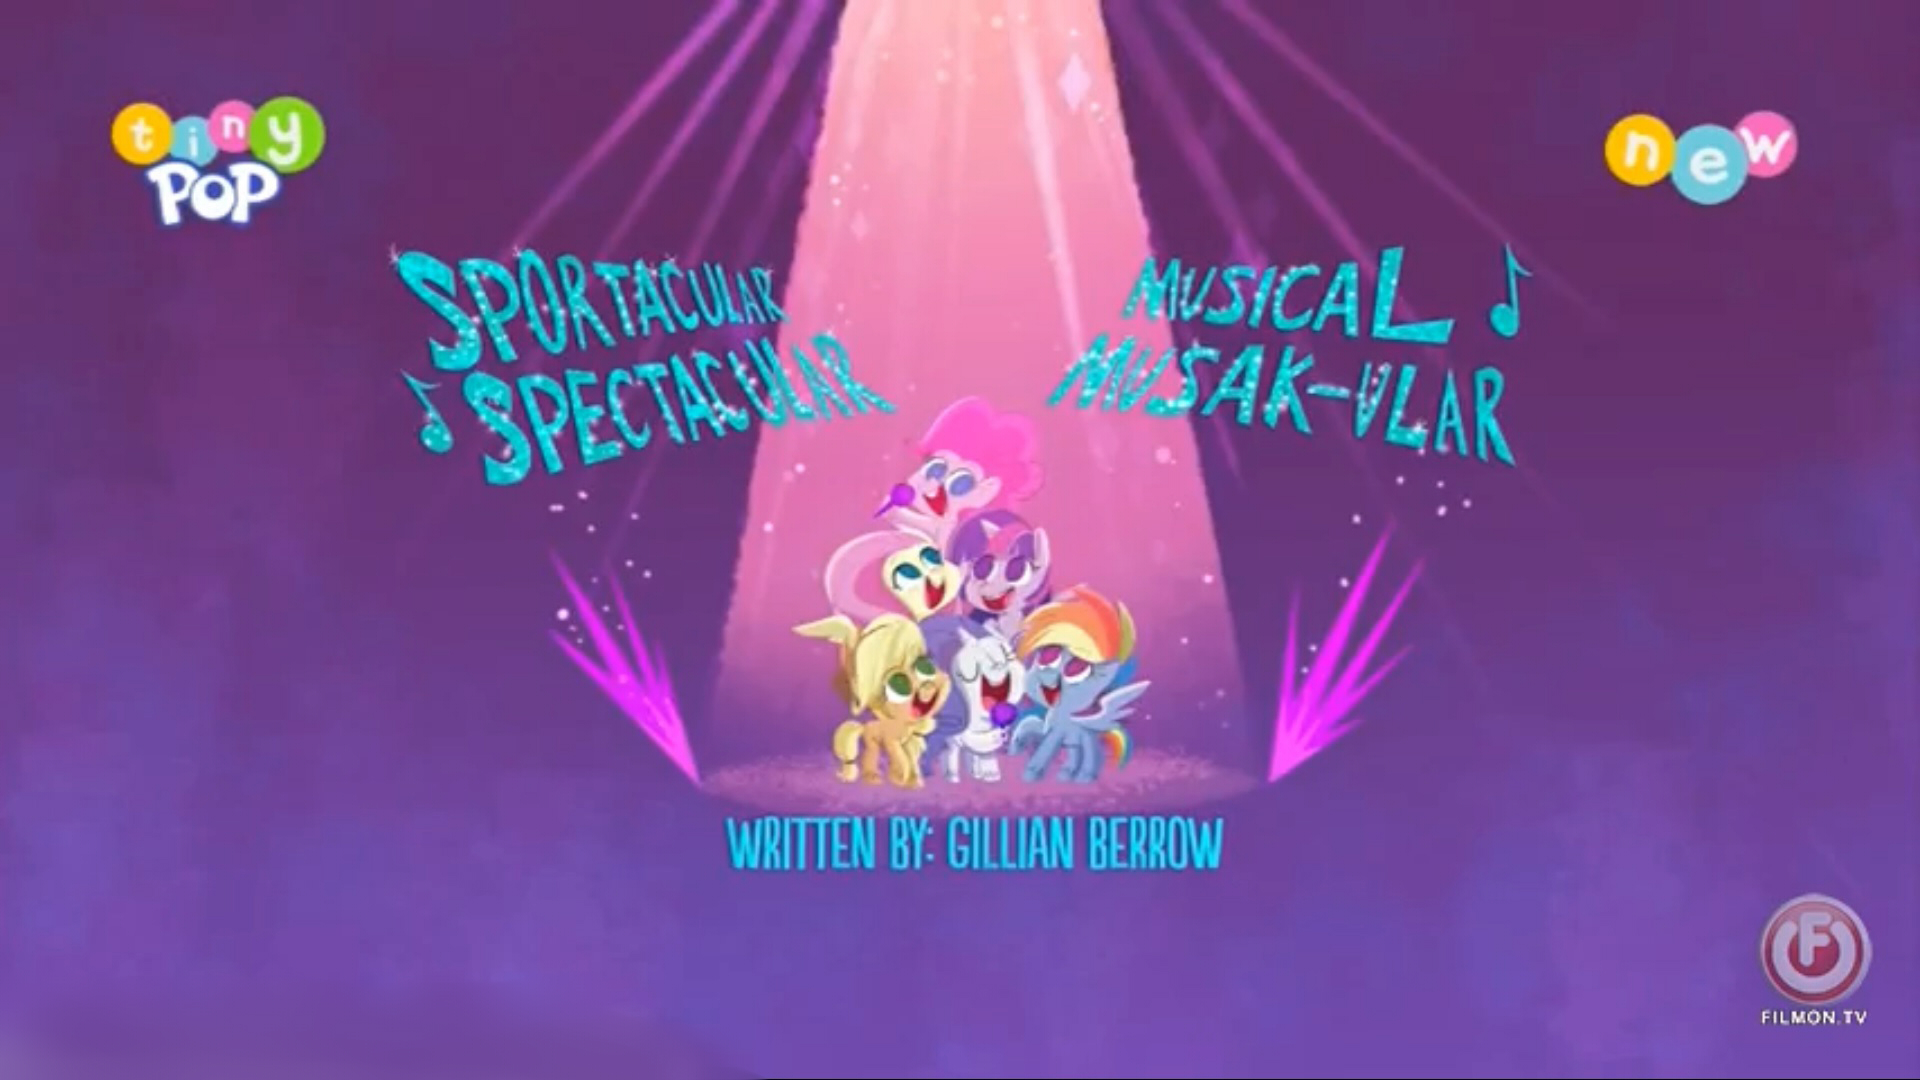 DVD screensaver corner bounce! - General Discussion - MLP Forums